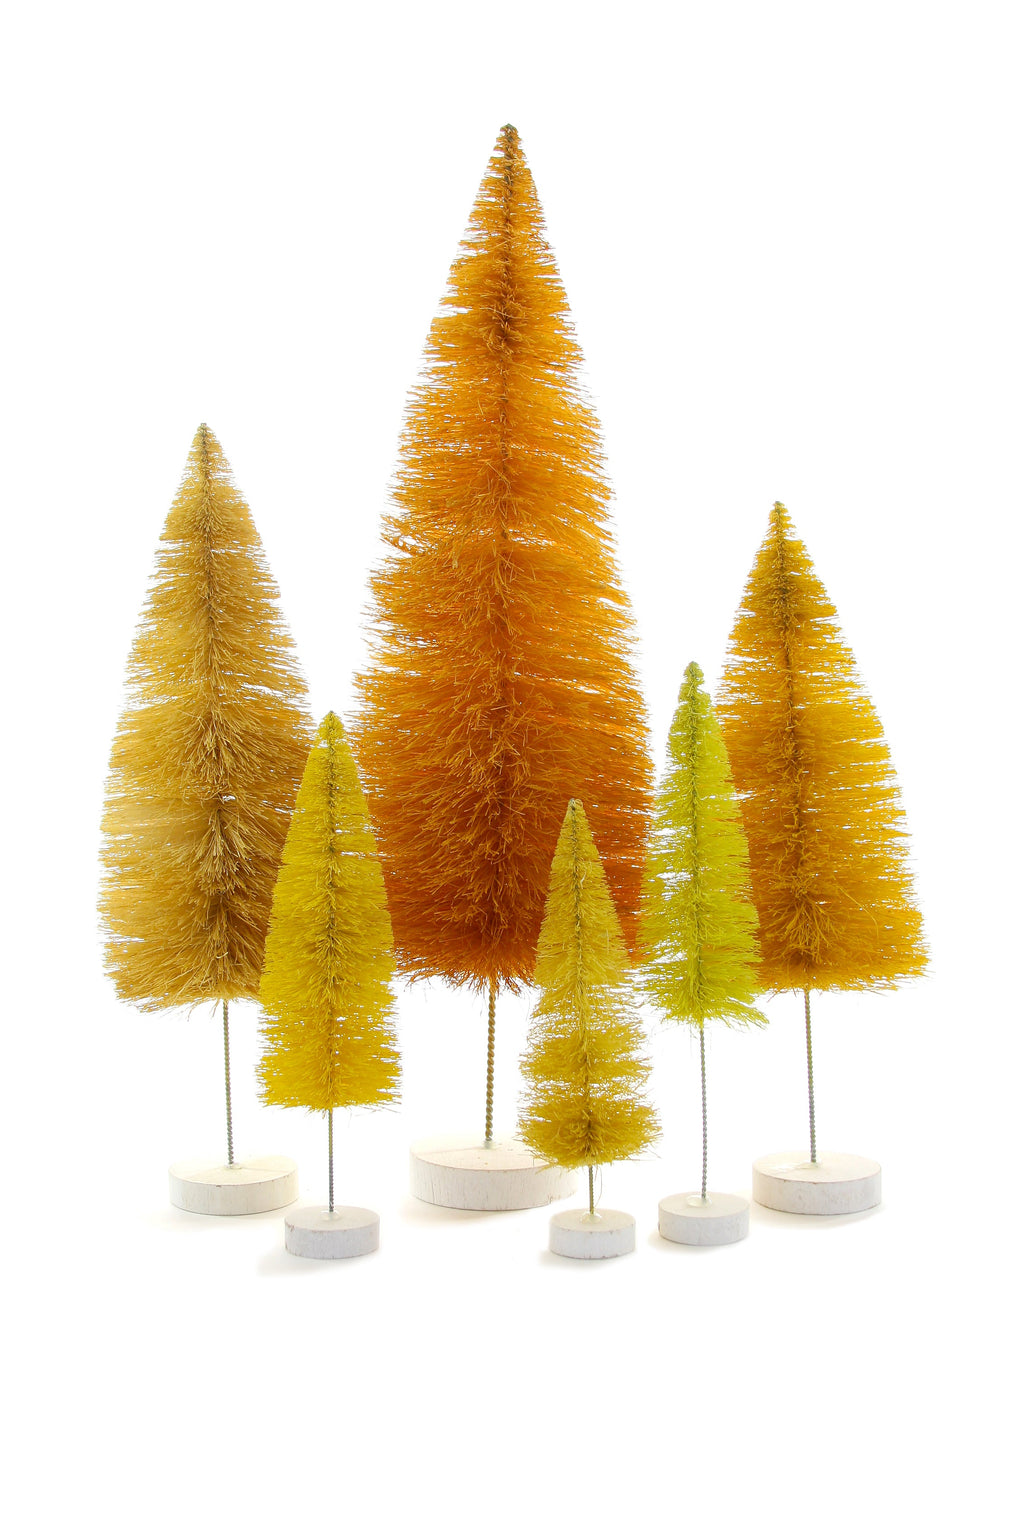 rainbow trees set of 6 in various colors 2